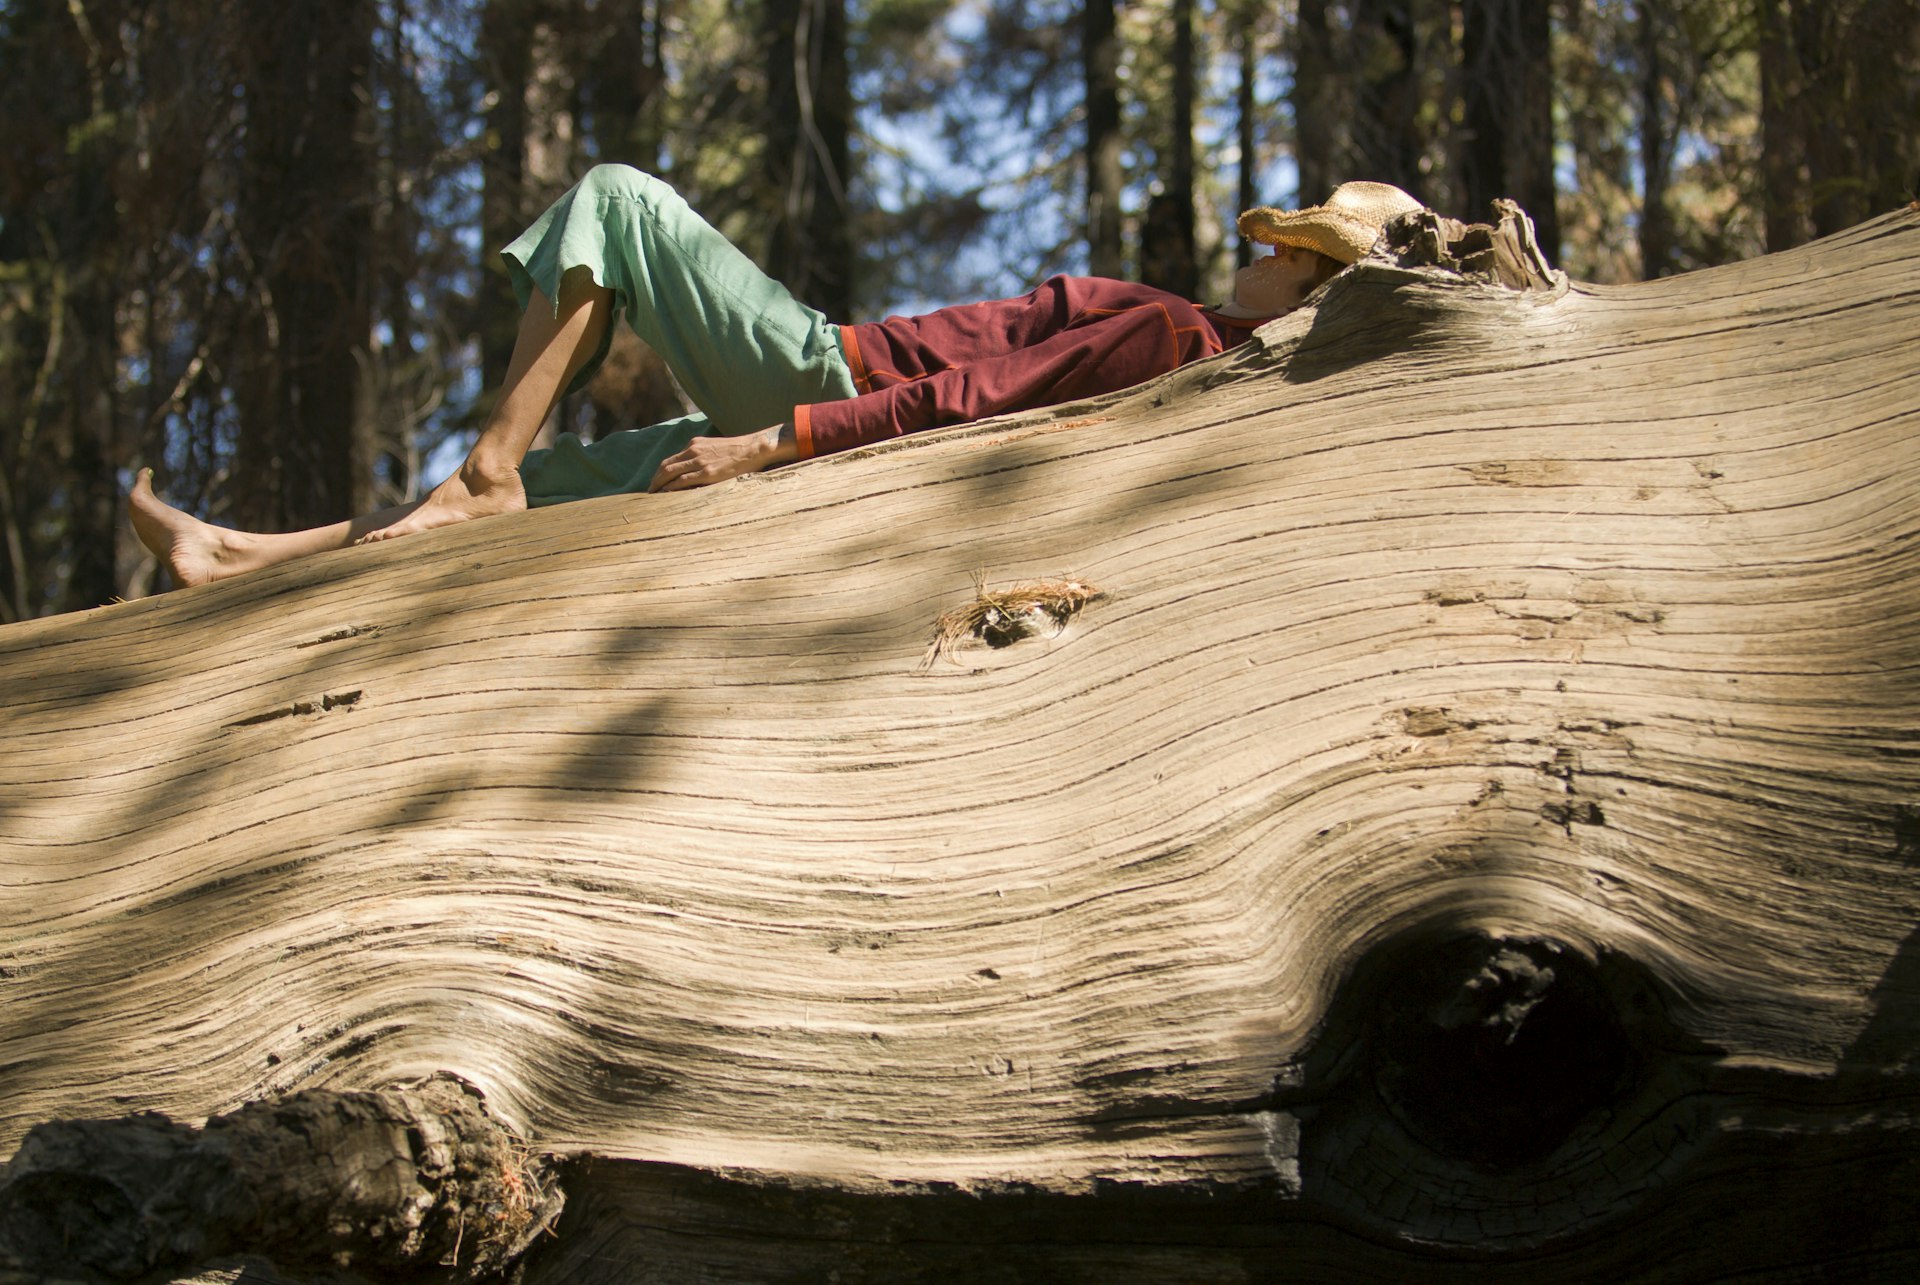 A woman dozes on a large tree trunk, which has fallen over. The woman wears a hat, which is pulled down over her eyes.